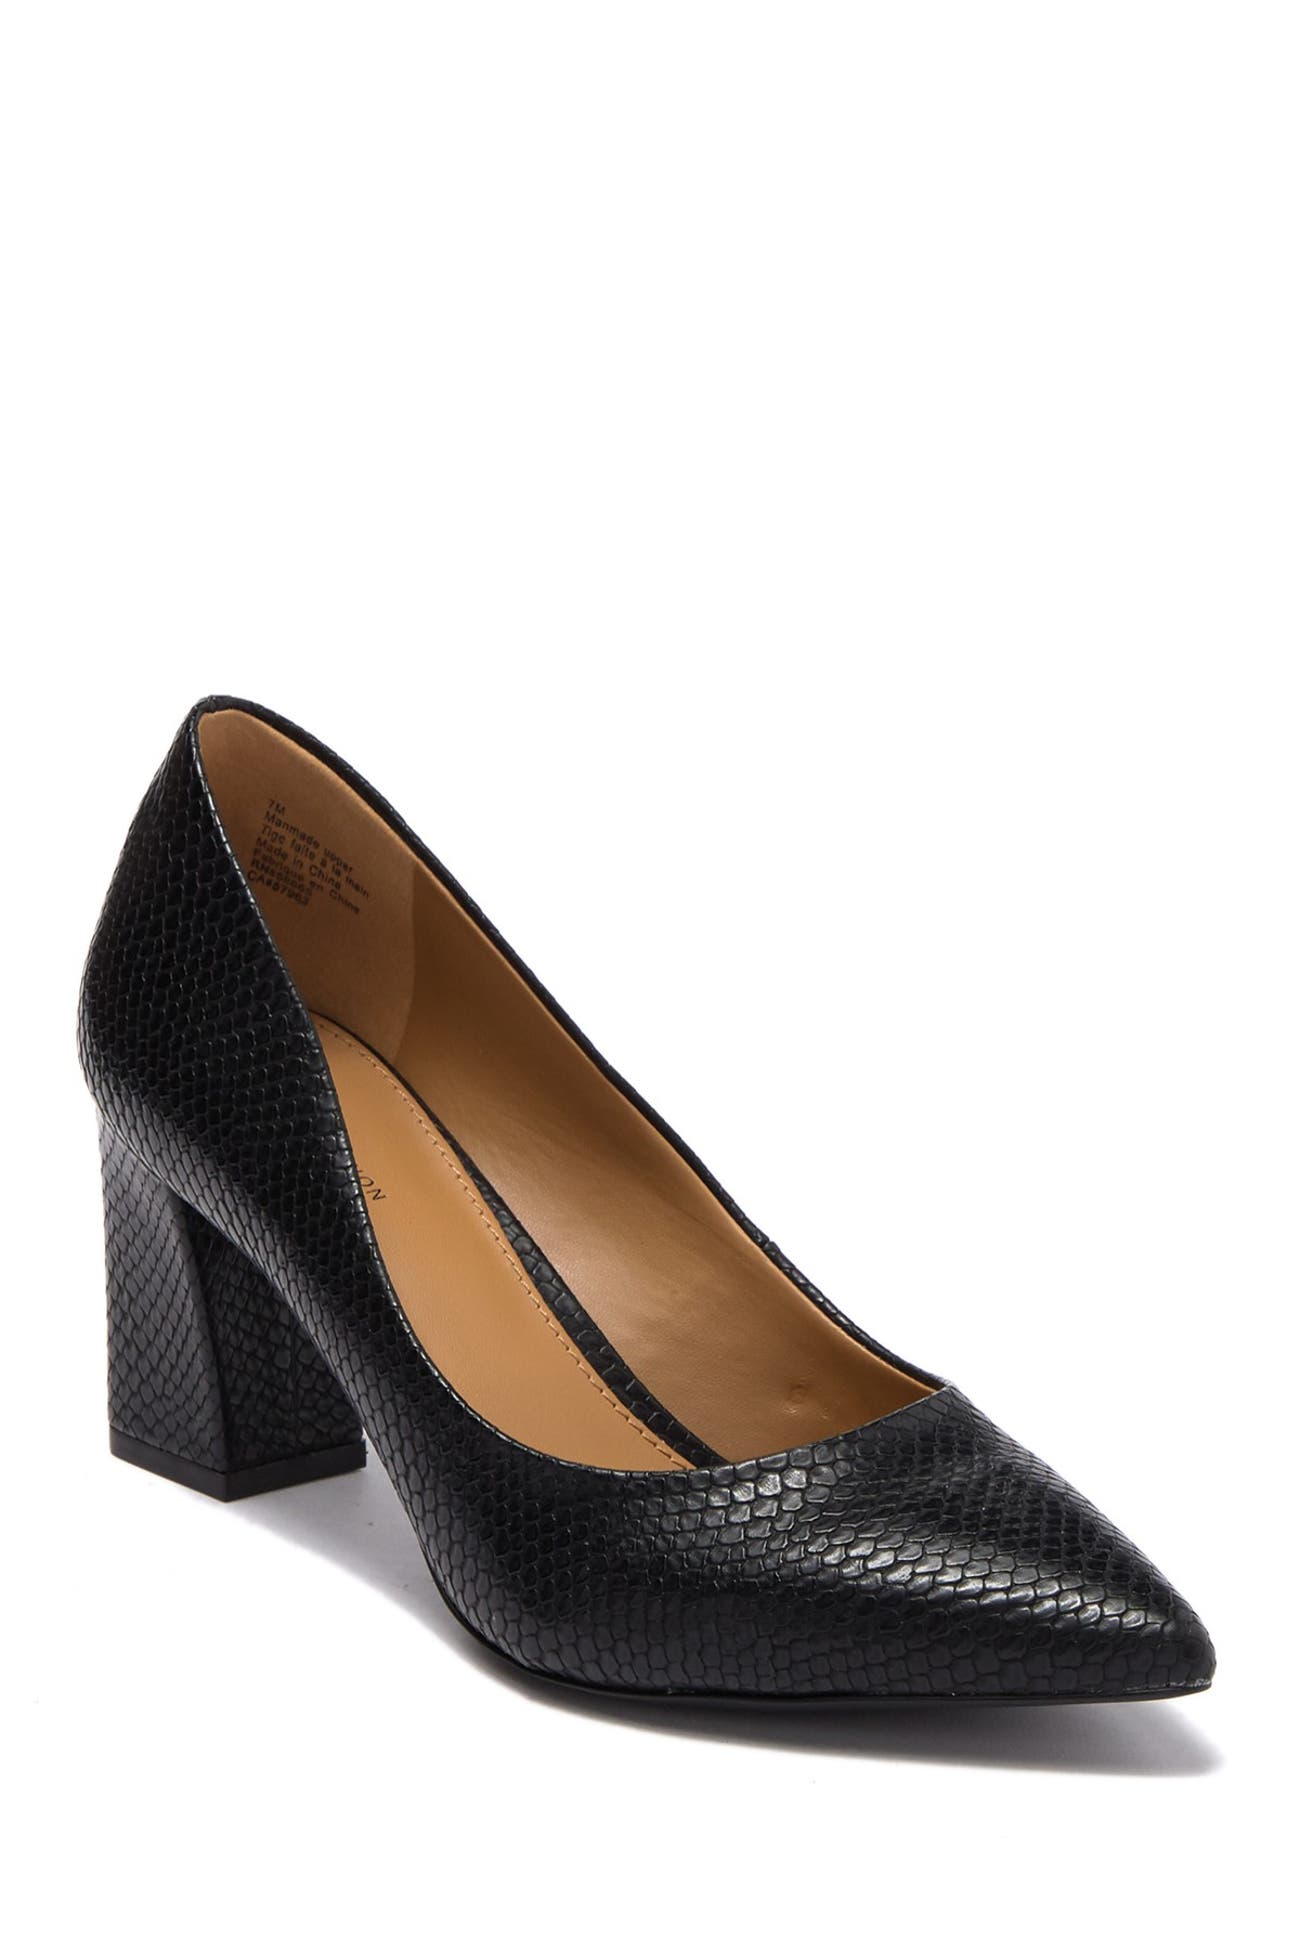 14th & Union | Audry Block Heel Pump - Wide Width Available | Nordstrom ...